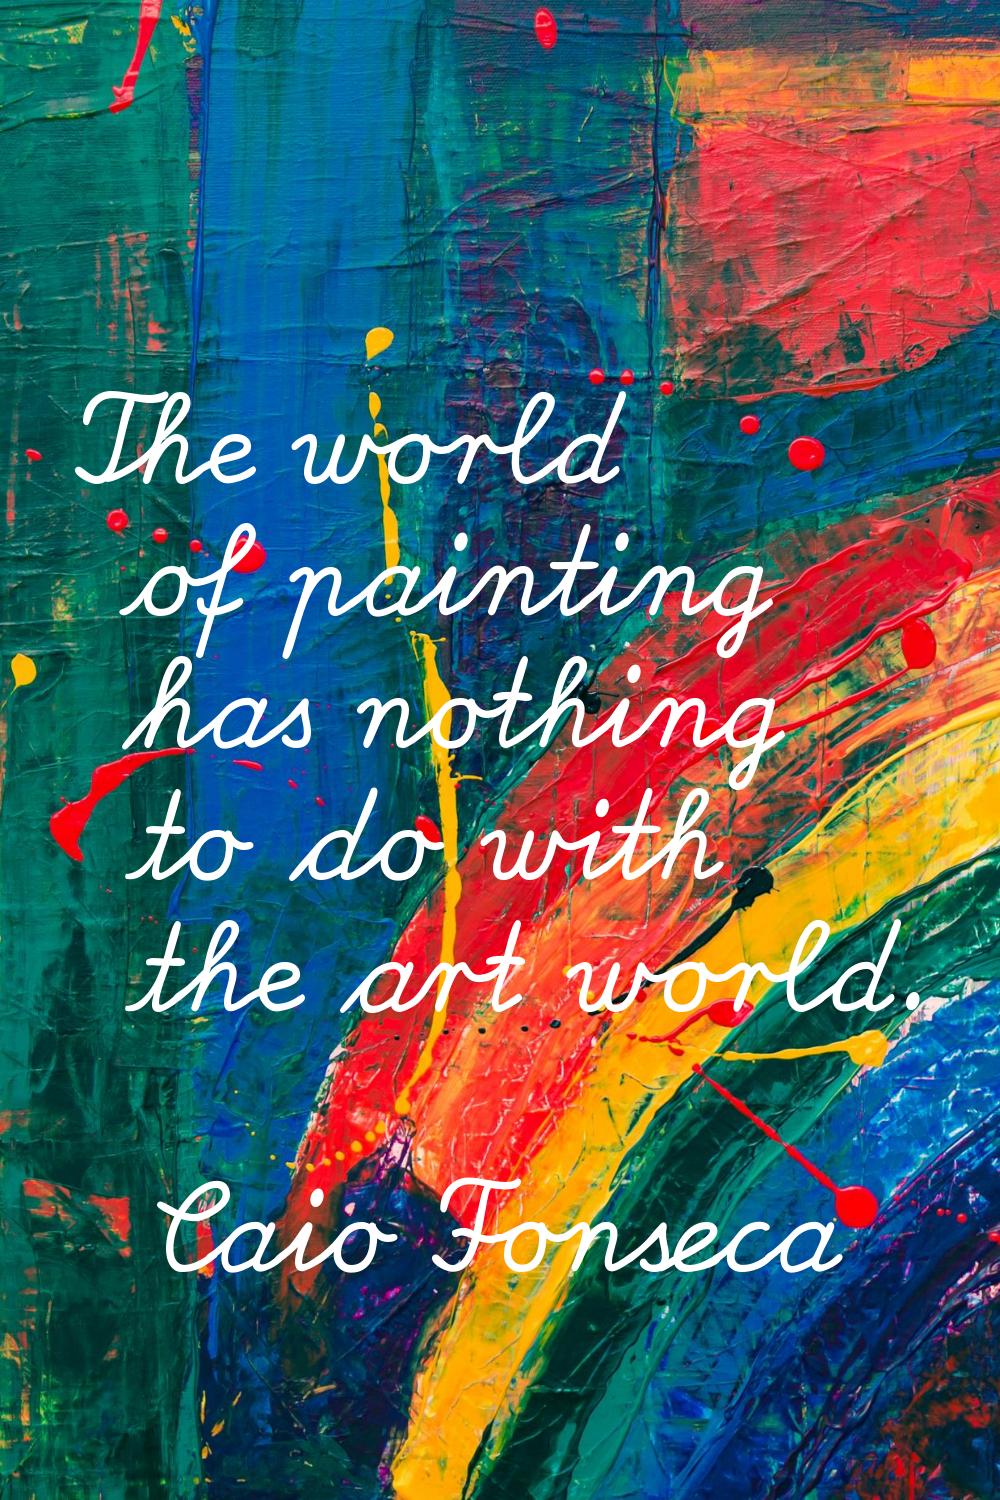 The world of painting has nothing to do with the art world.